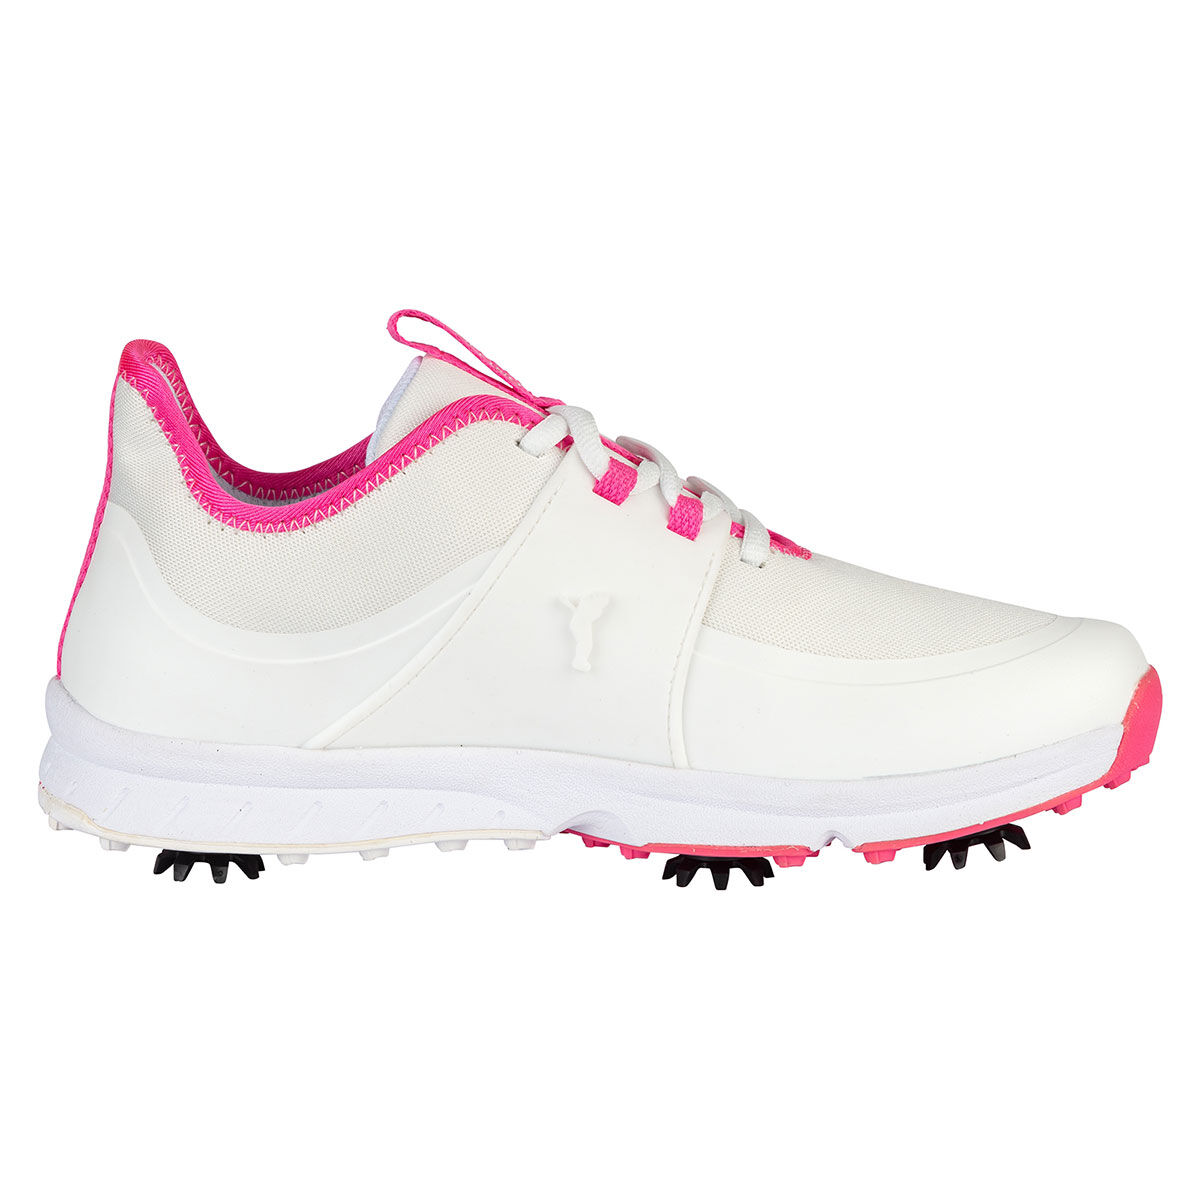 GOLFINO Women’s White and Pink Comfortable Linda Waterproof Spiked Golf Shoes, Size: 4 | American Golf